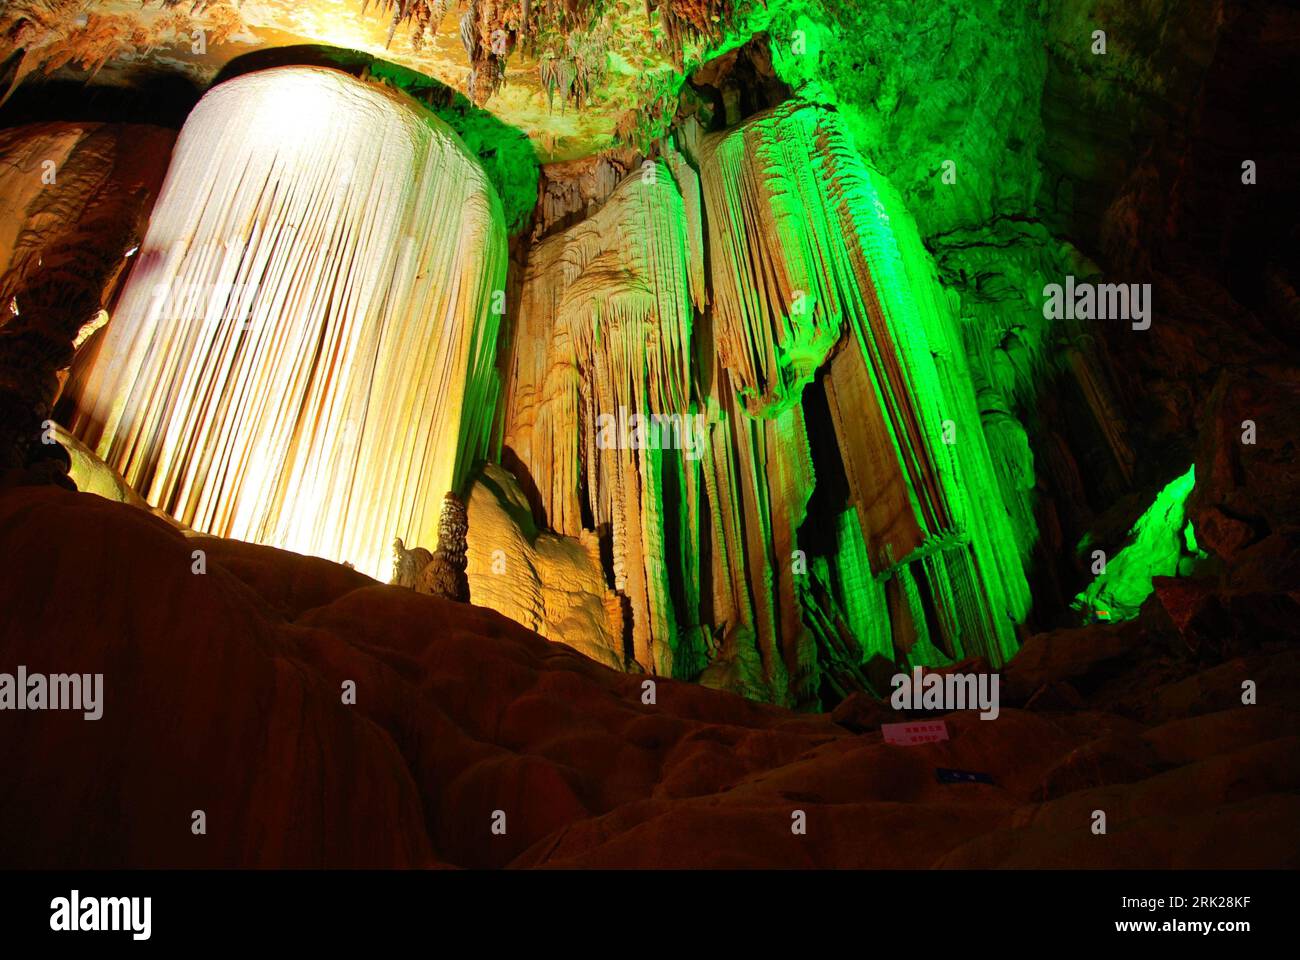 Bildnummer: 53153736  Datum: 28.04.2009  Copyright: imago/Xinhua  Photo taken on April 24 shows the stalactite in the Furong Karst Cave in Wulong County of southwest China s Chongqing. kbdig   Tropfstein in der Furong Karst Höhle in Wulong County of Südwest China s Chongqing. Tropfsteinhöhle quer    Bildnummer 53153736 Date 28 04 2009 Copyright Imago XINHUA Photo Taken ON April 24 Shows The stalactite in The Furong Karst Cave in Wulong County of Southwest China S Chongqing Kbdig Stalactite in the Furong Karst Cave in Wulong County of Southwest China S Chongqing Cave horizontal Stock Photo